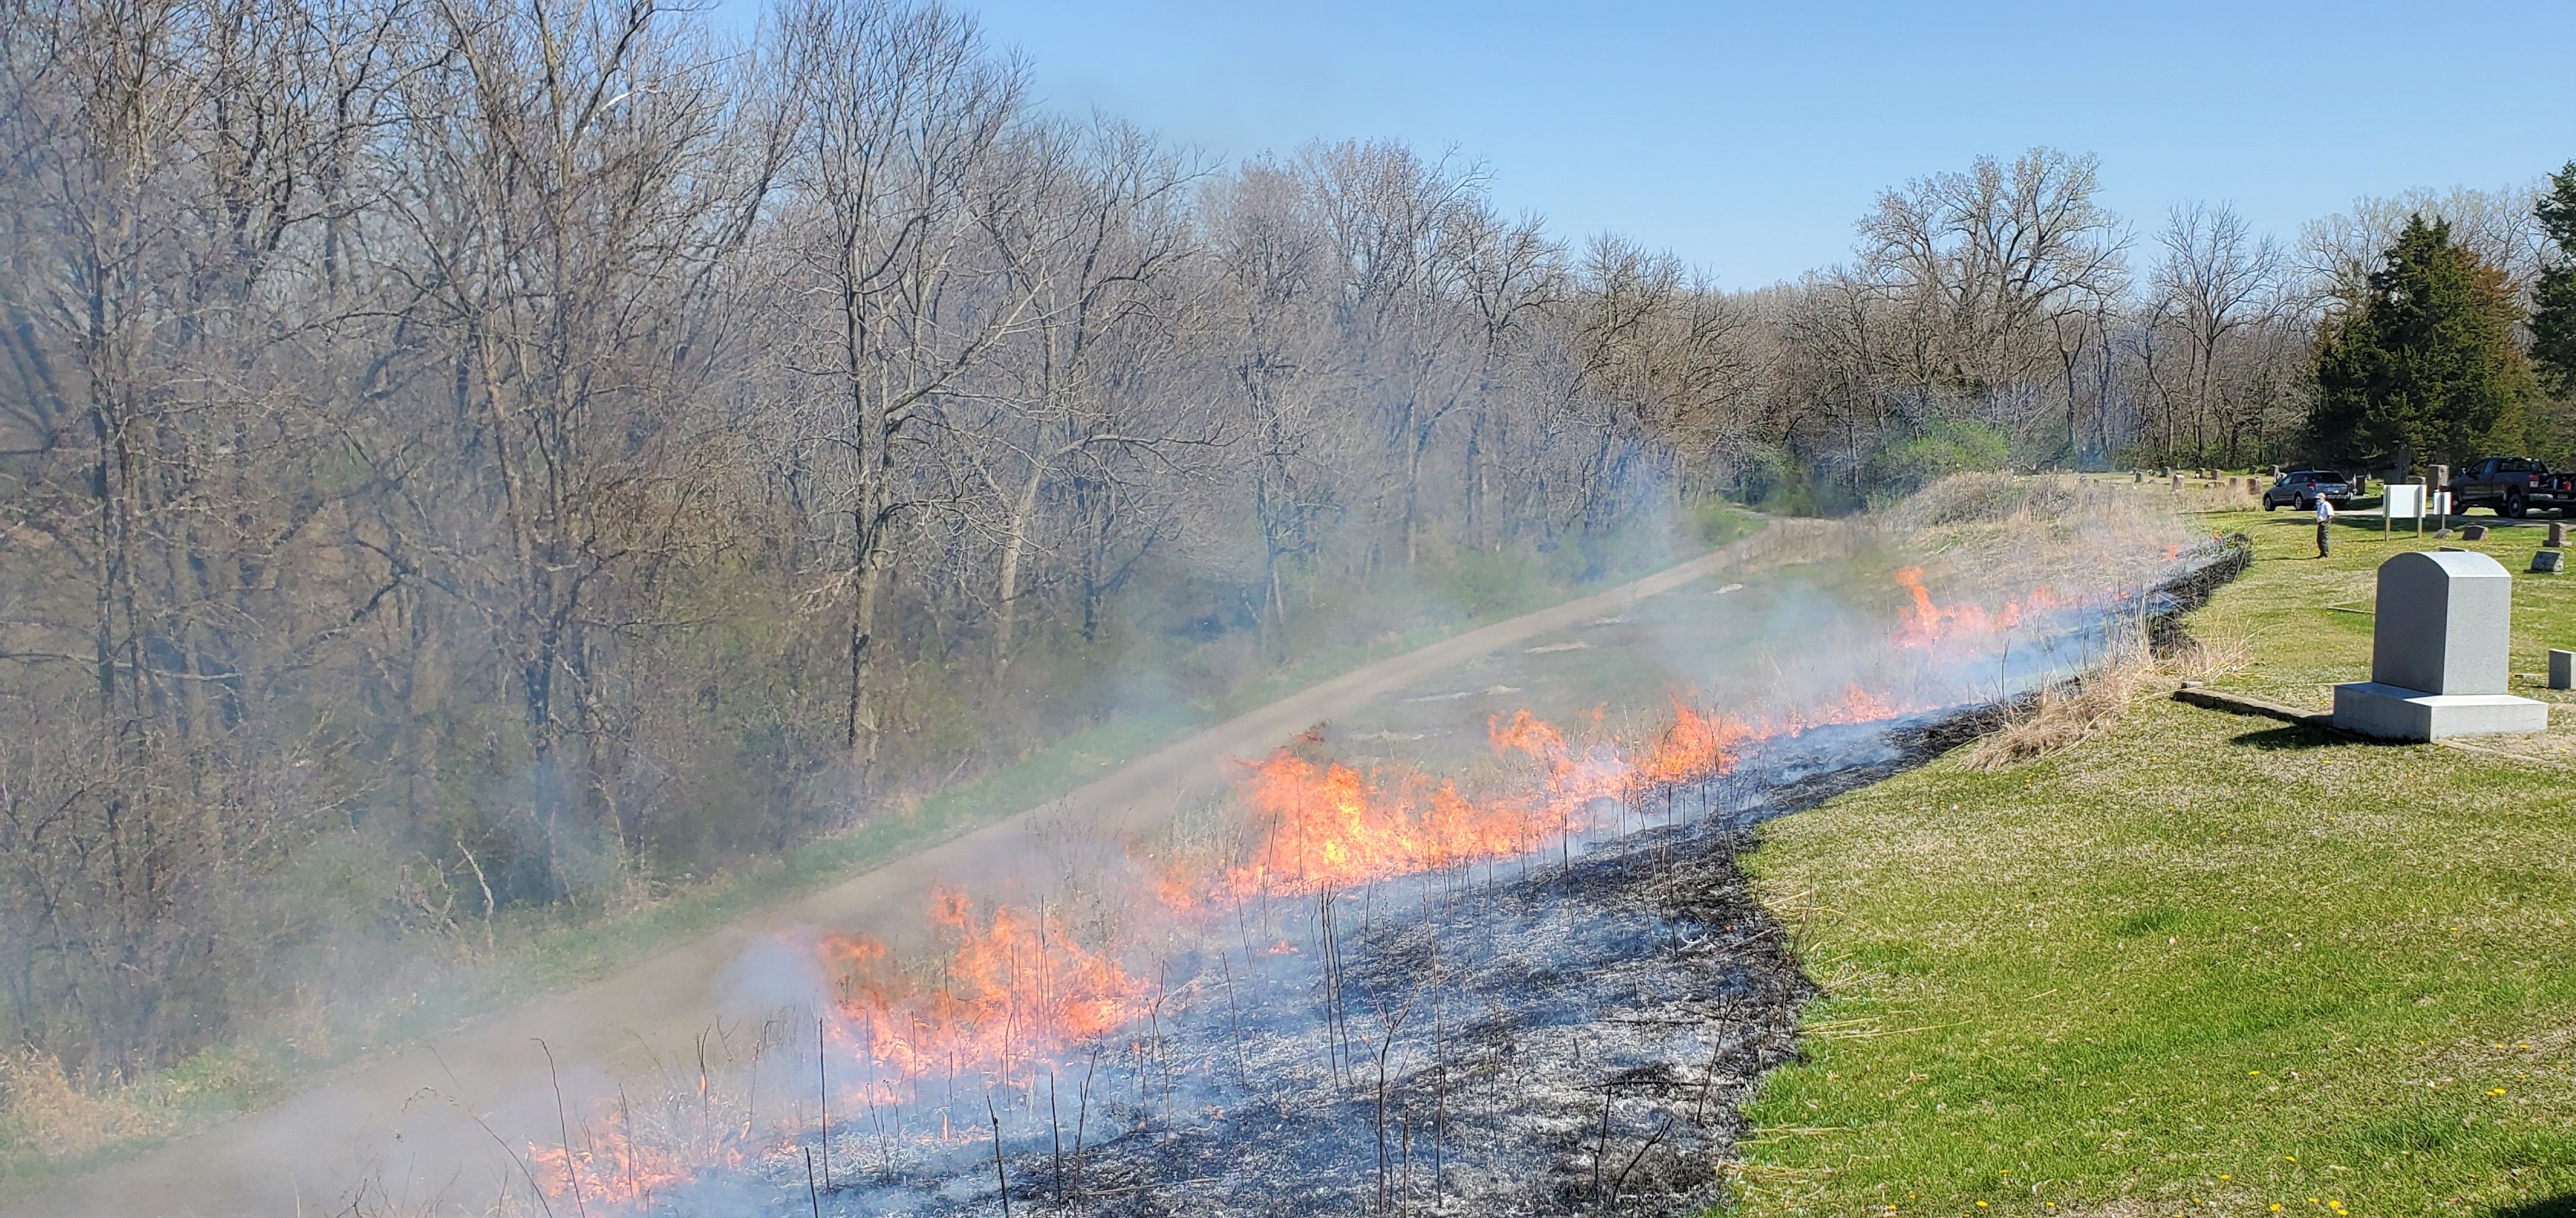 A line of flames marks the steady advance of a managed fire used to restore prairie